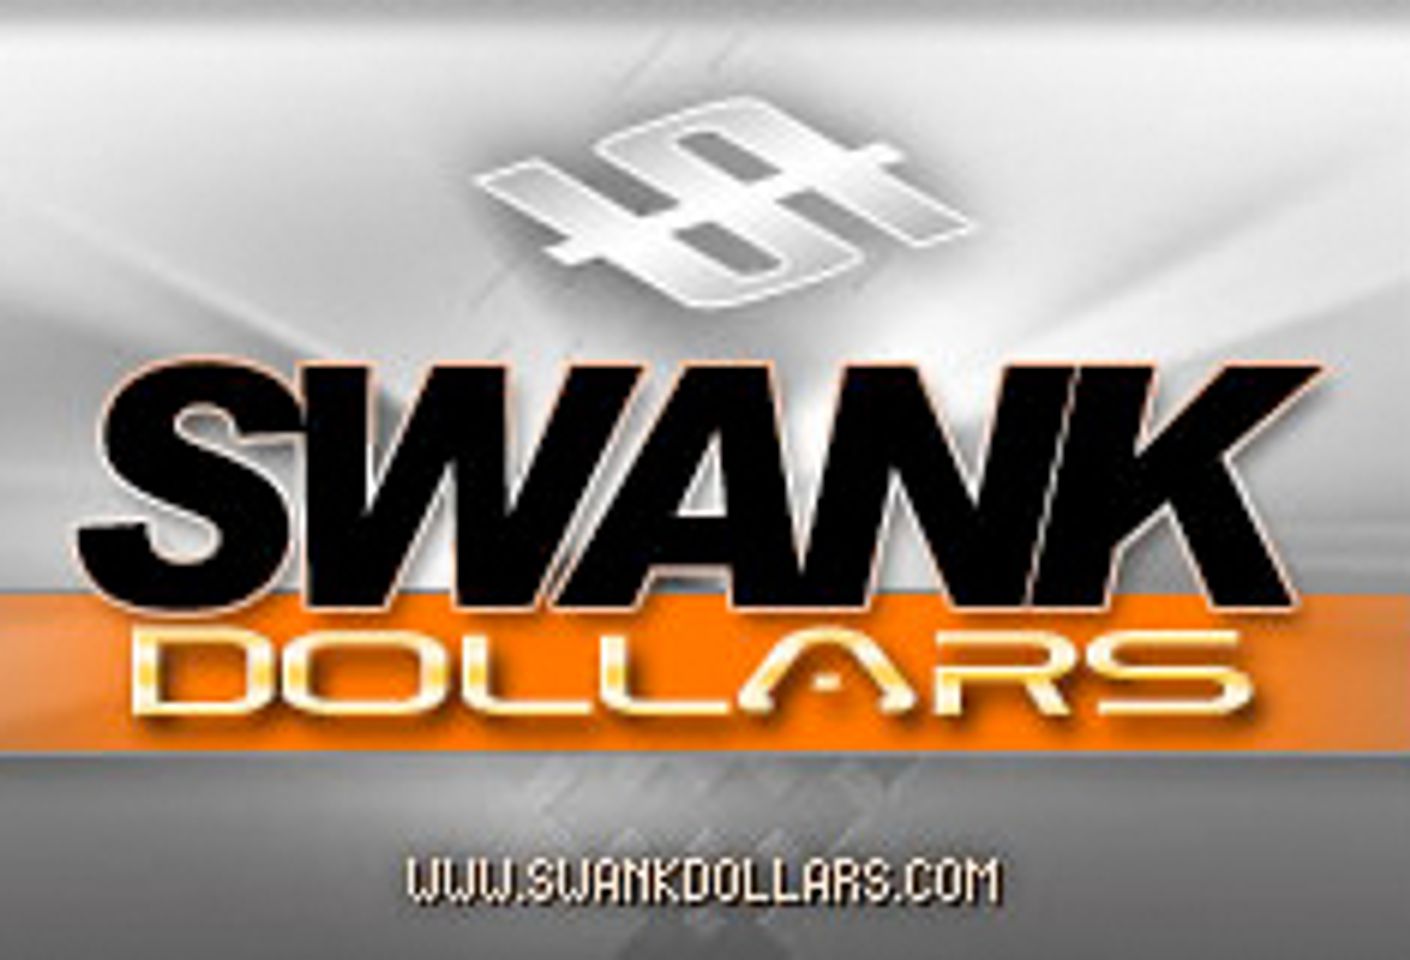 SwankDollars Re-Launches GentOnline.com with Promo Special